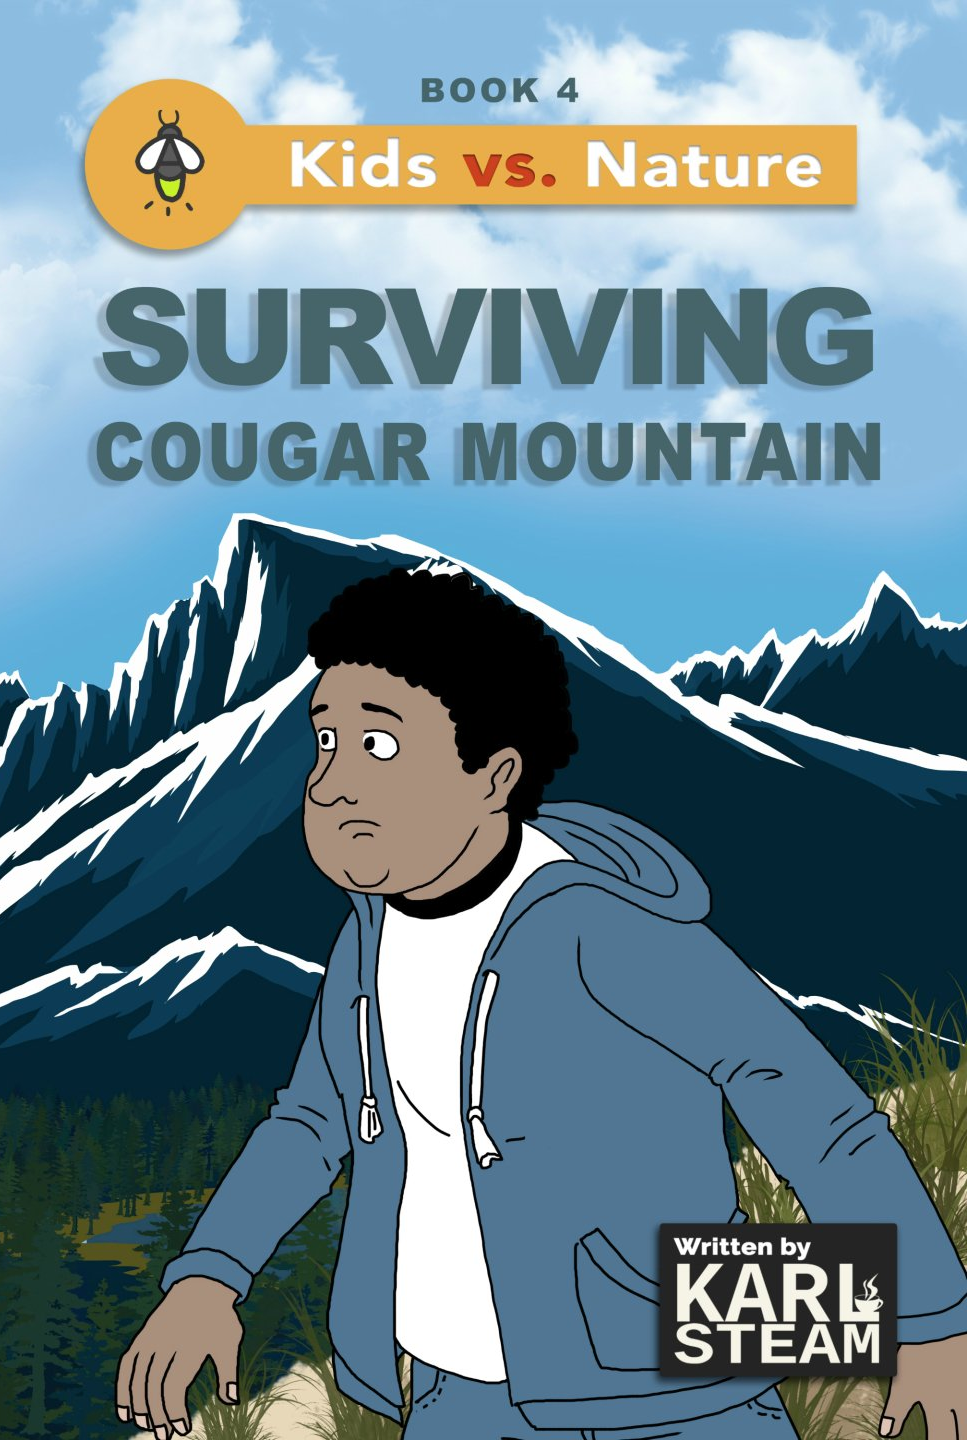 Book cover image of Surviving Cougar Mountain: Kids vs. Nature (Book 4). A child walking in front of a mountain. Written by Karl Steam.